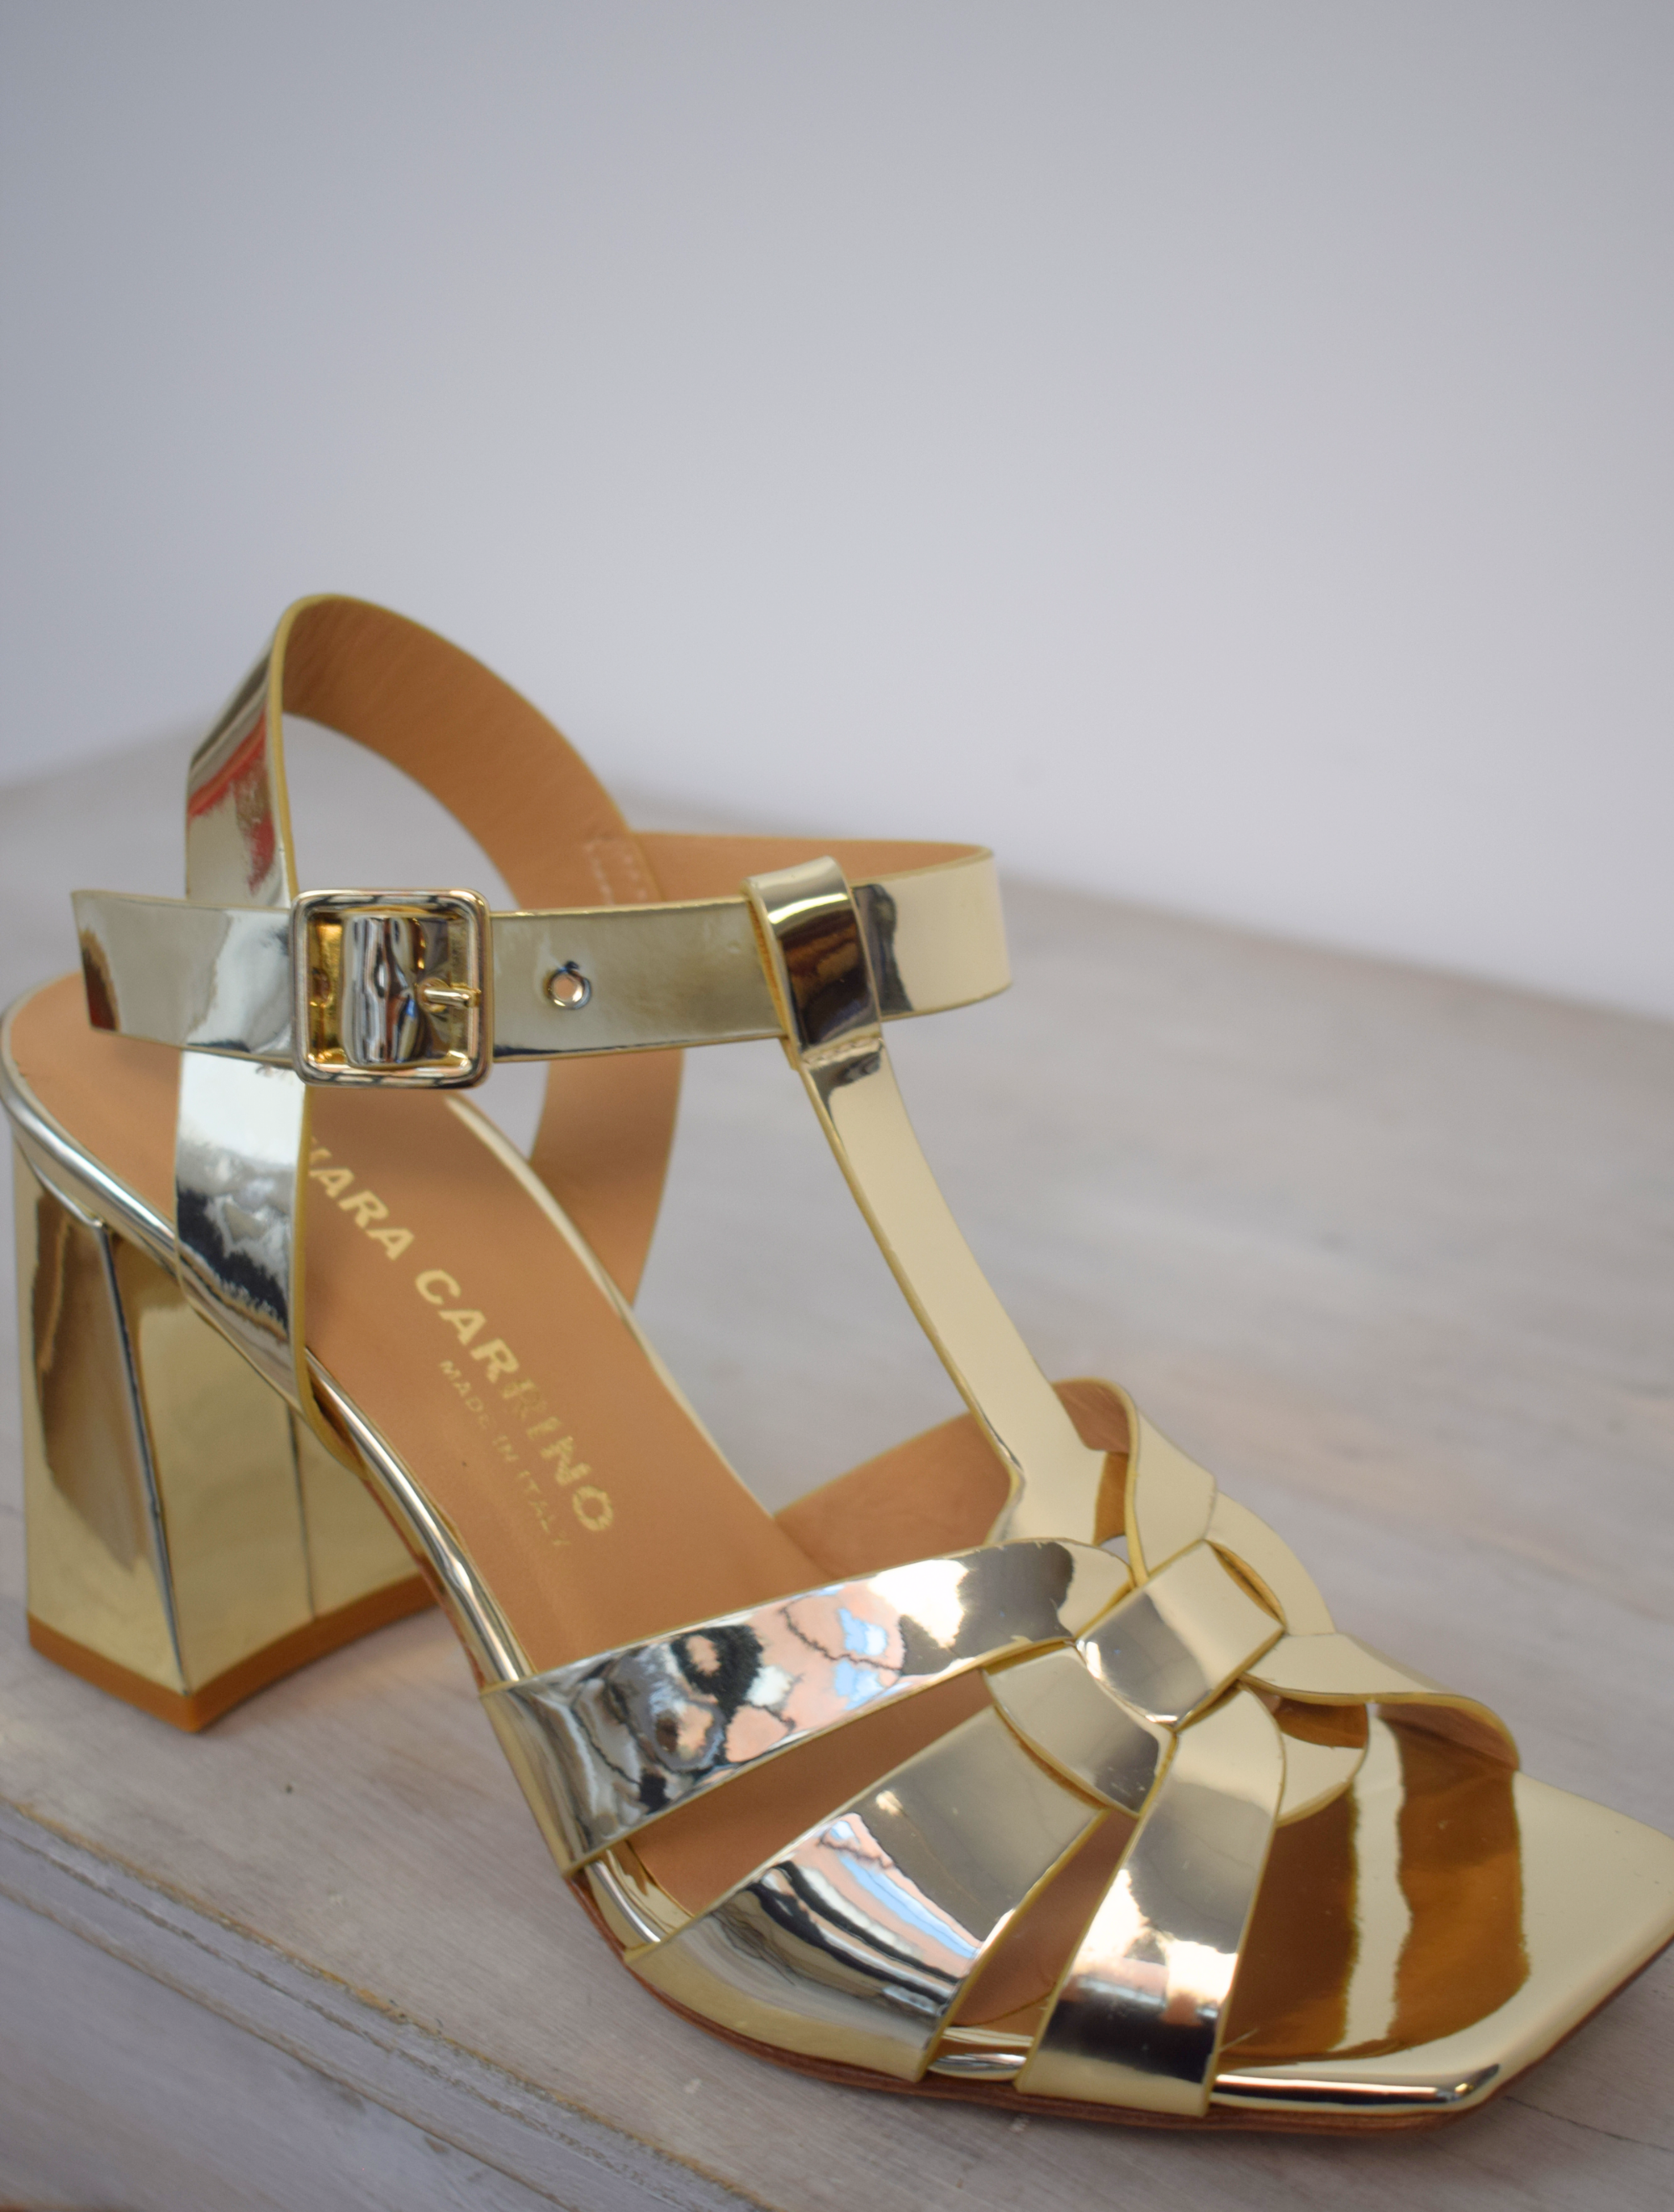 Gold heels with ankle strap 